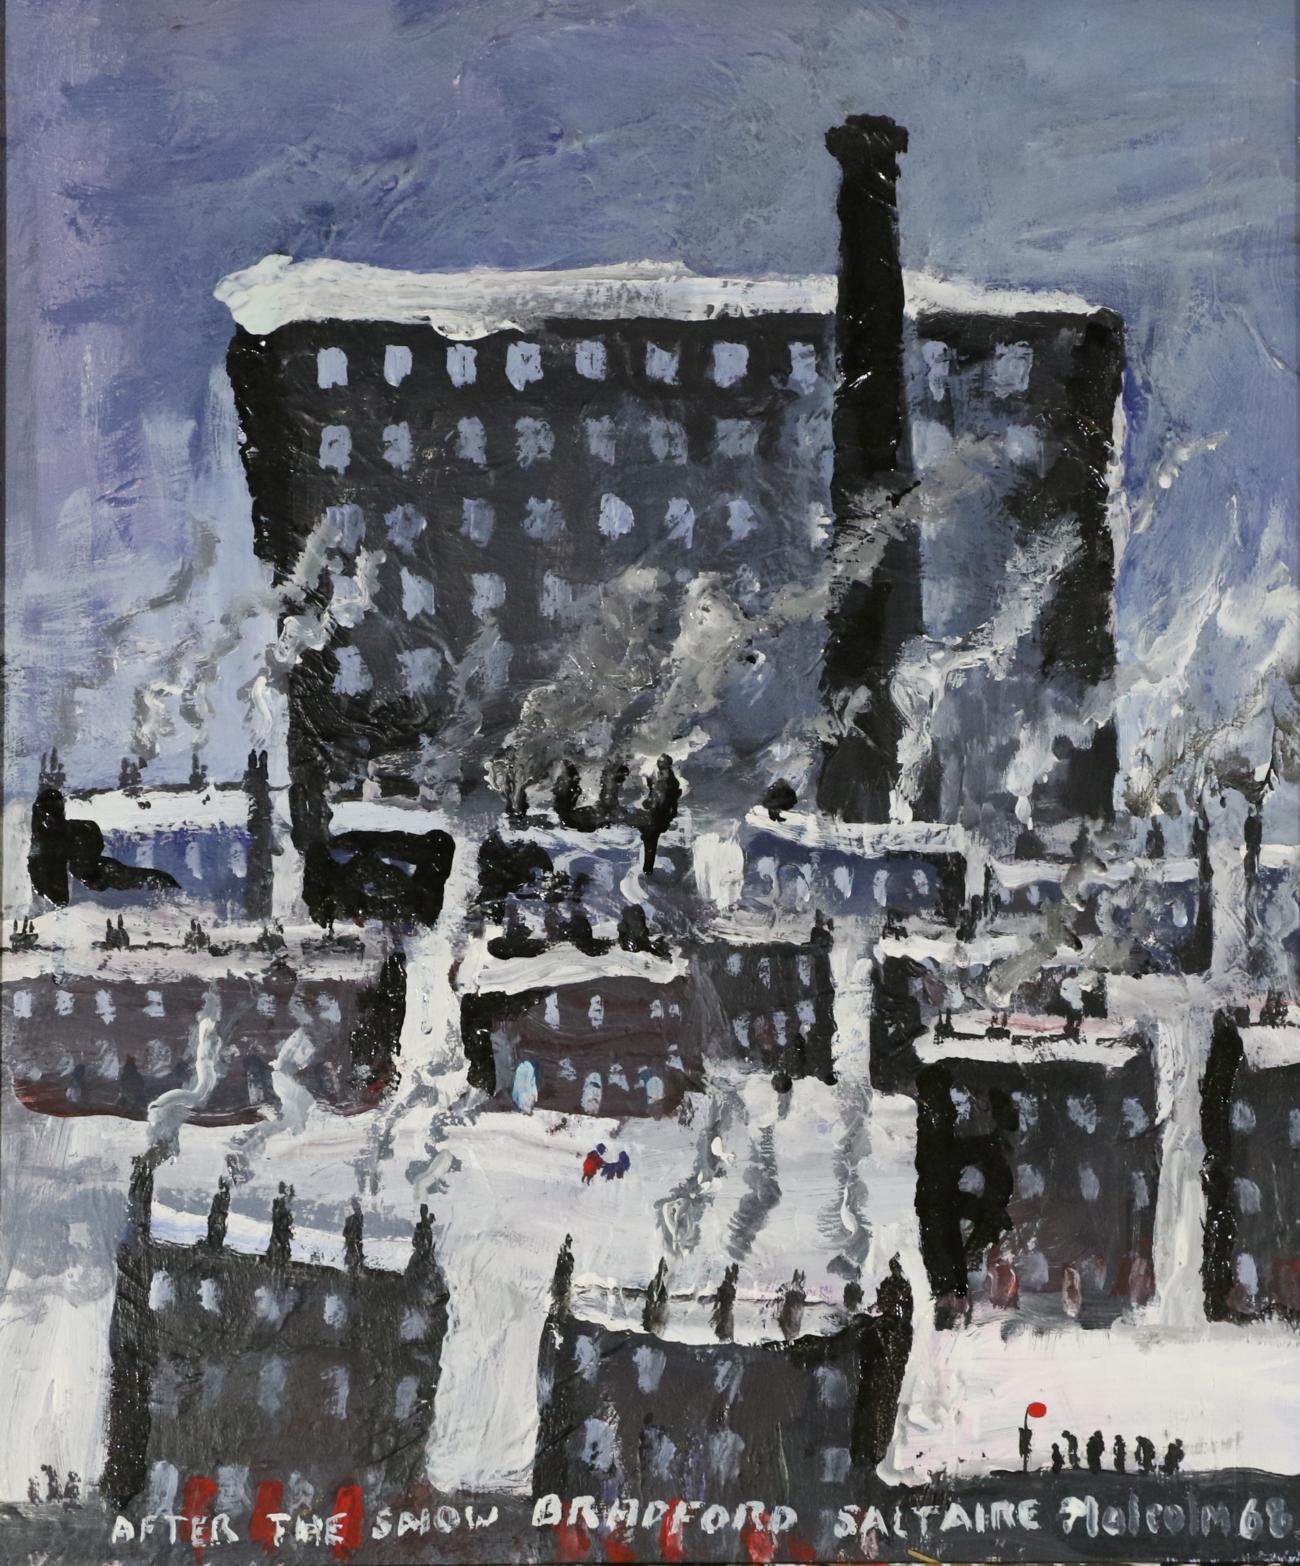 Malcolm Scott (Contemporary) ''After the Snow Bradford Saltaire'' Signed, inscribed and dated (19)